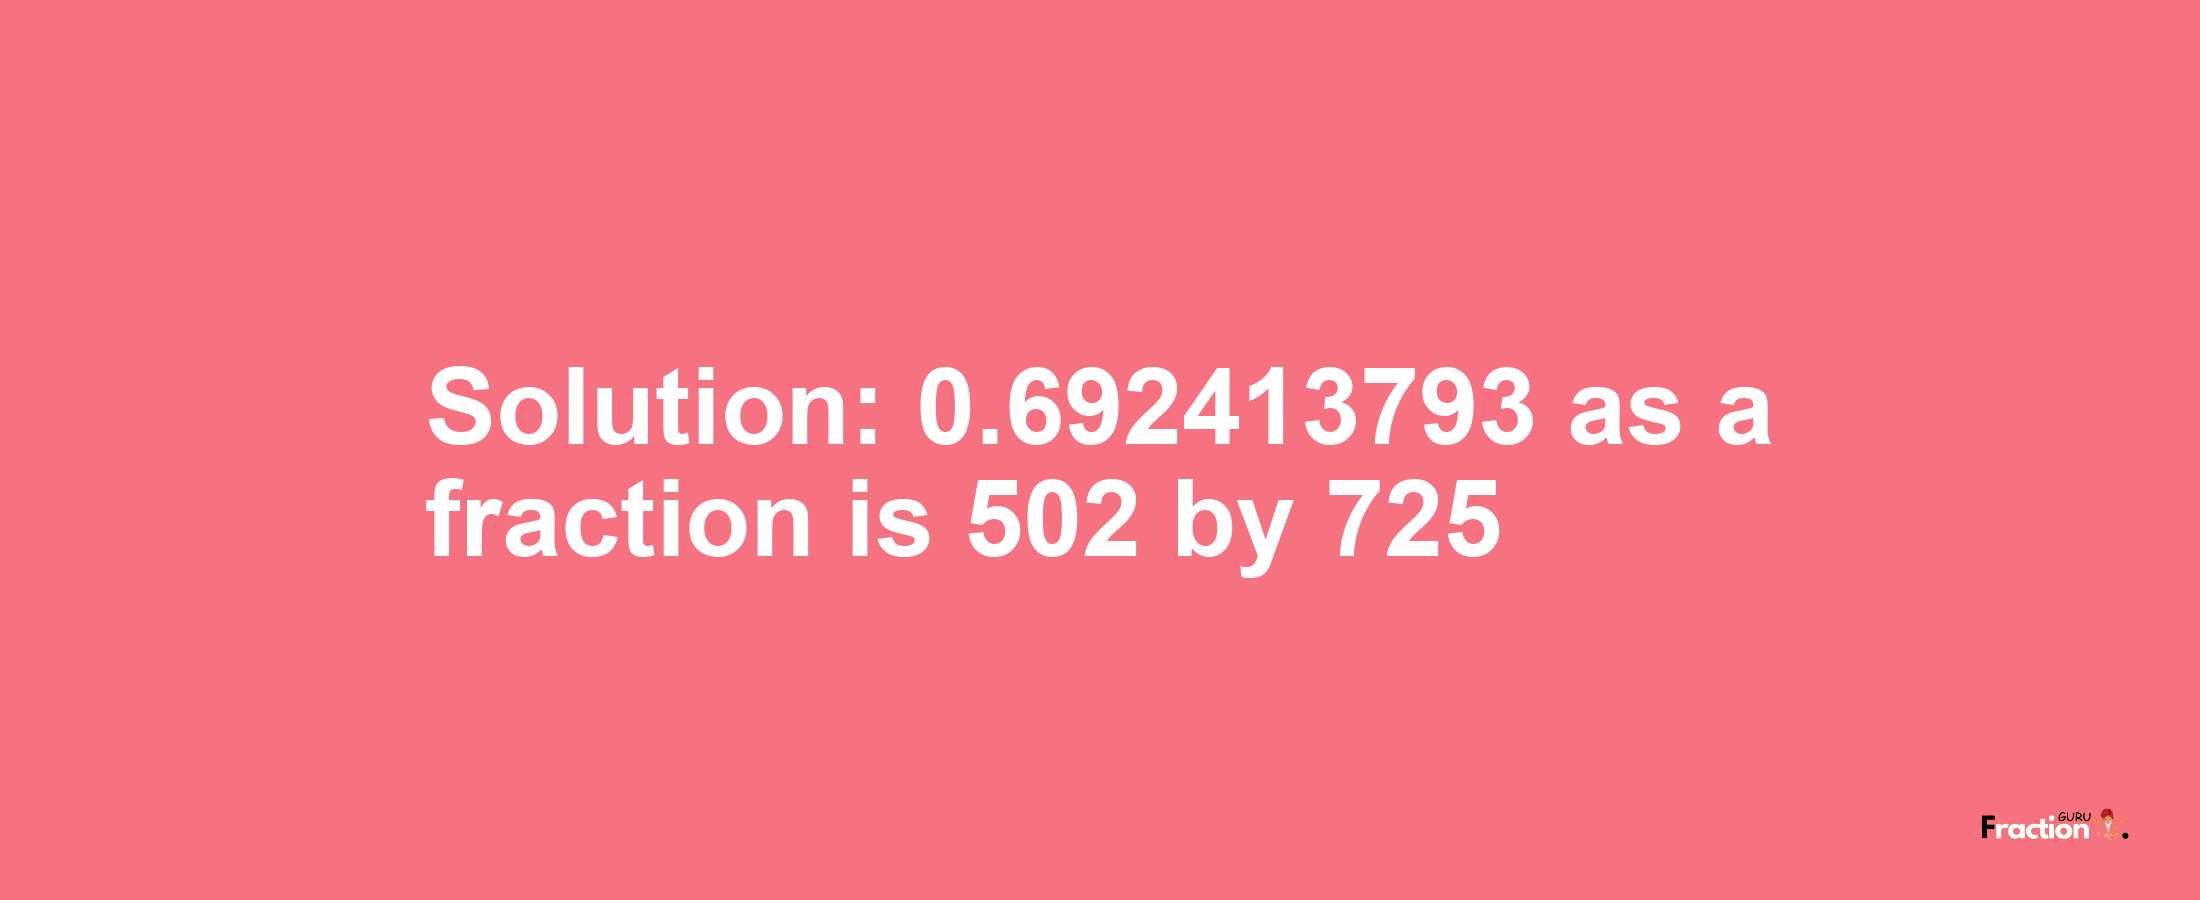 Solution:0.692413793 as a fraction is 502/725